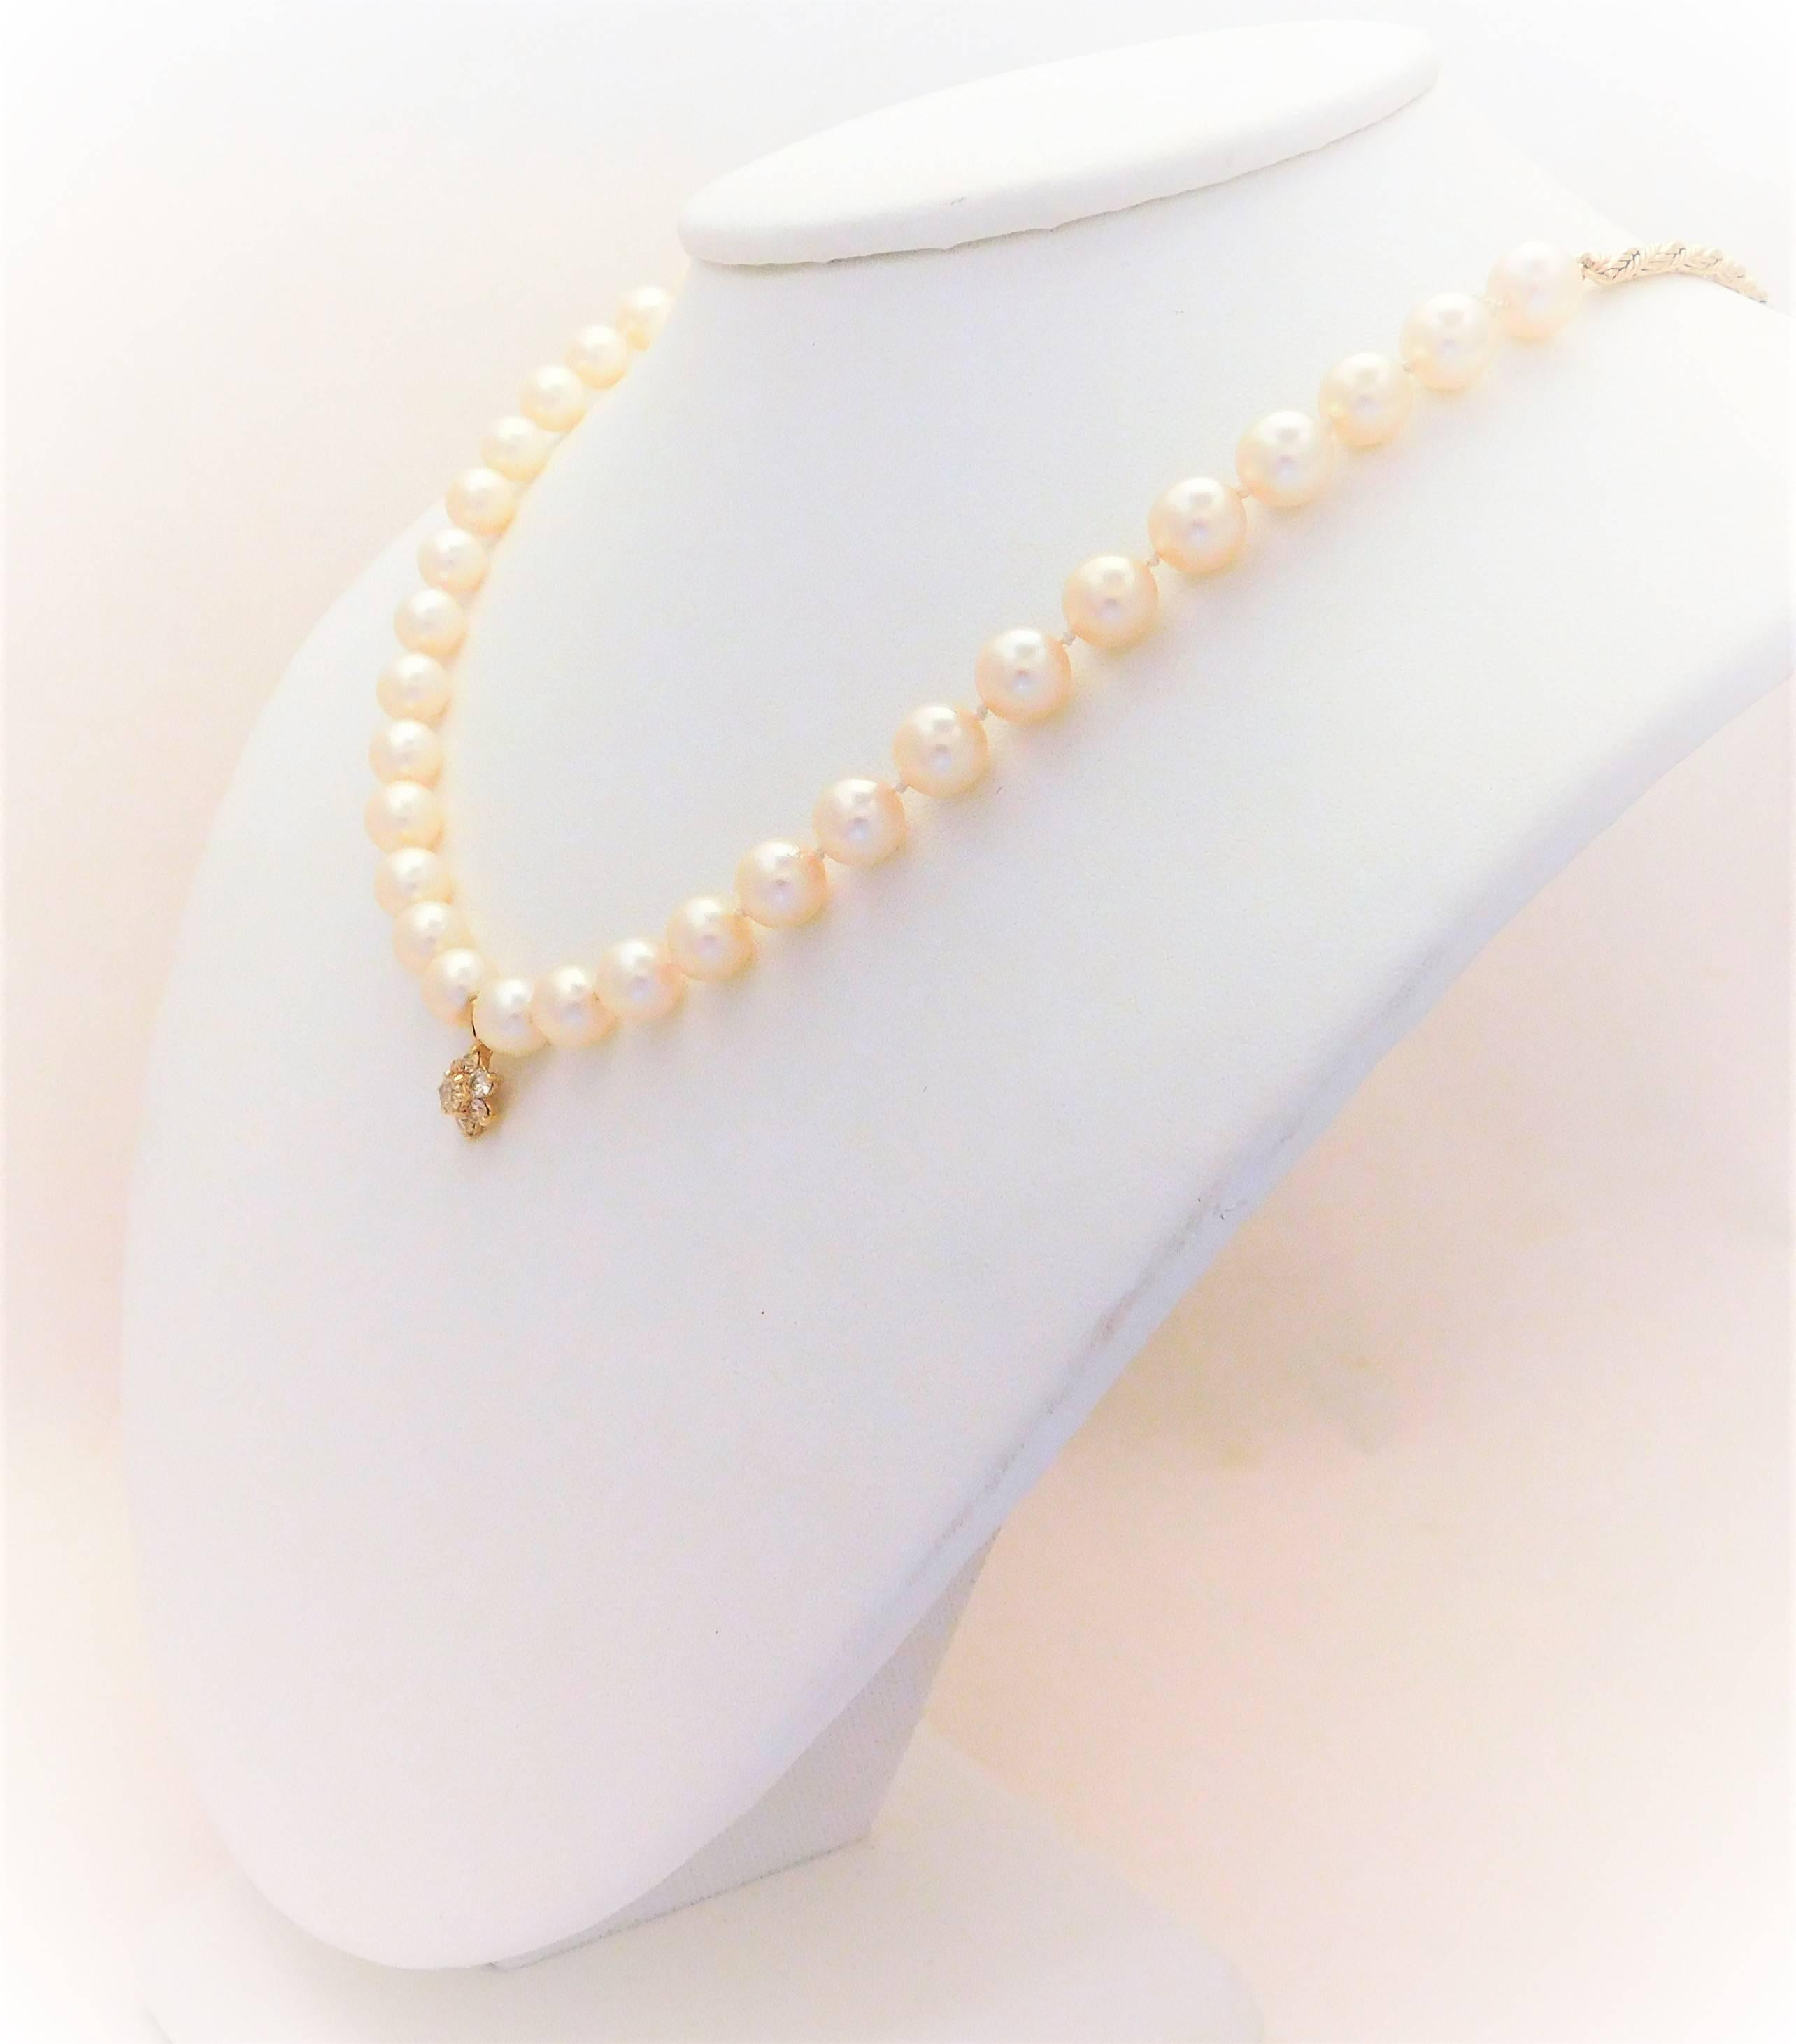 Women's Midcentury White Pearl and 14 Karat Gold Necklace with Diamond Star Pendant